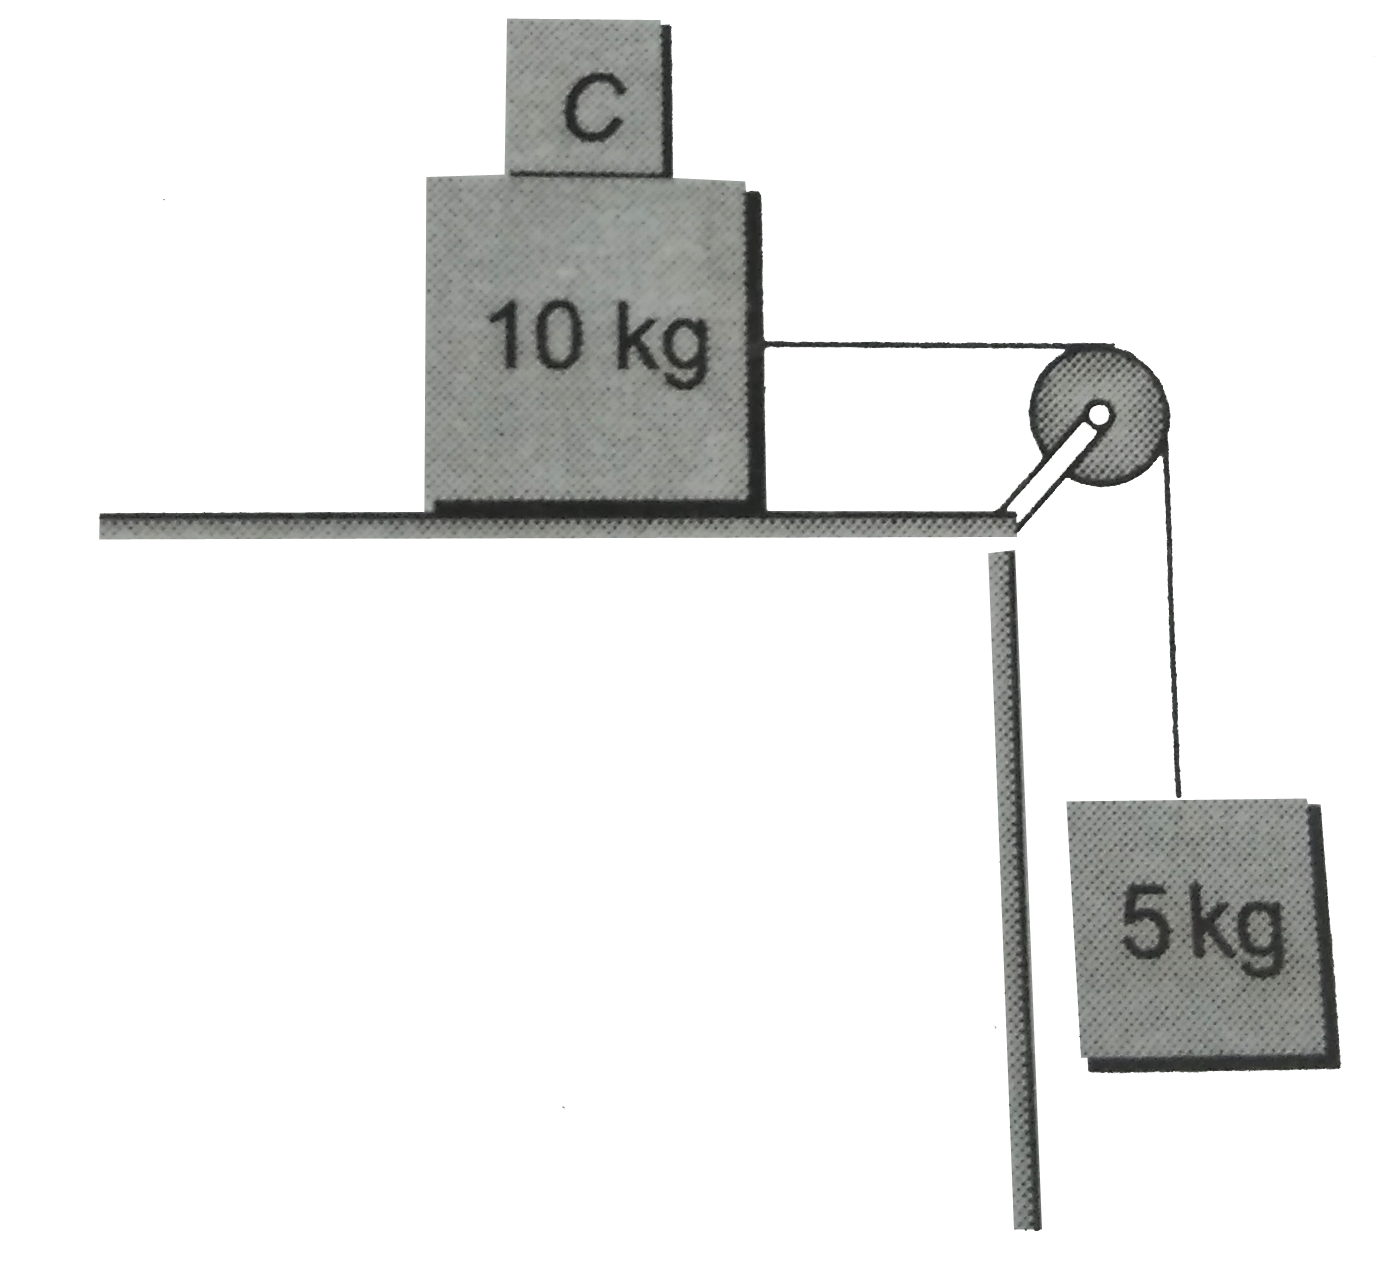 Two masses A and B of 10 kg and 5 kg, respectively , are connected with a string passing over a frictionless pulley fixed at the corner of a table as shown. The coefficient of static friction between A and the table is 0.2. The minimum mass C that should be placed on A to prevent it from moving is equal to